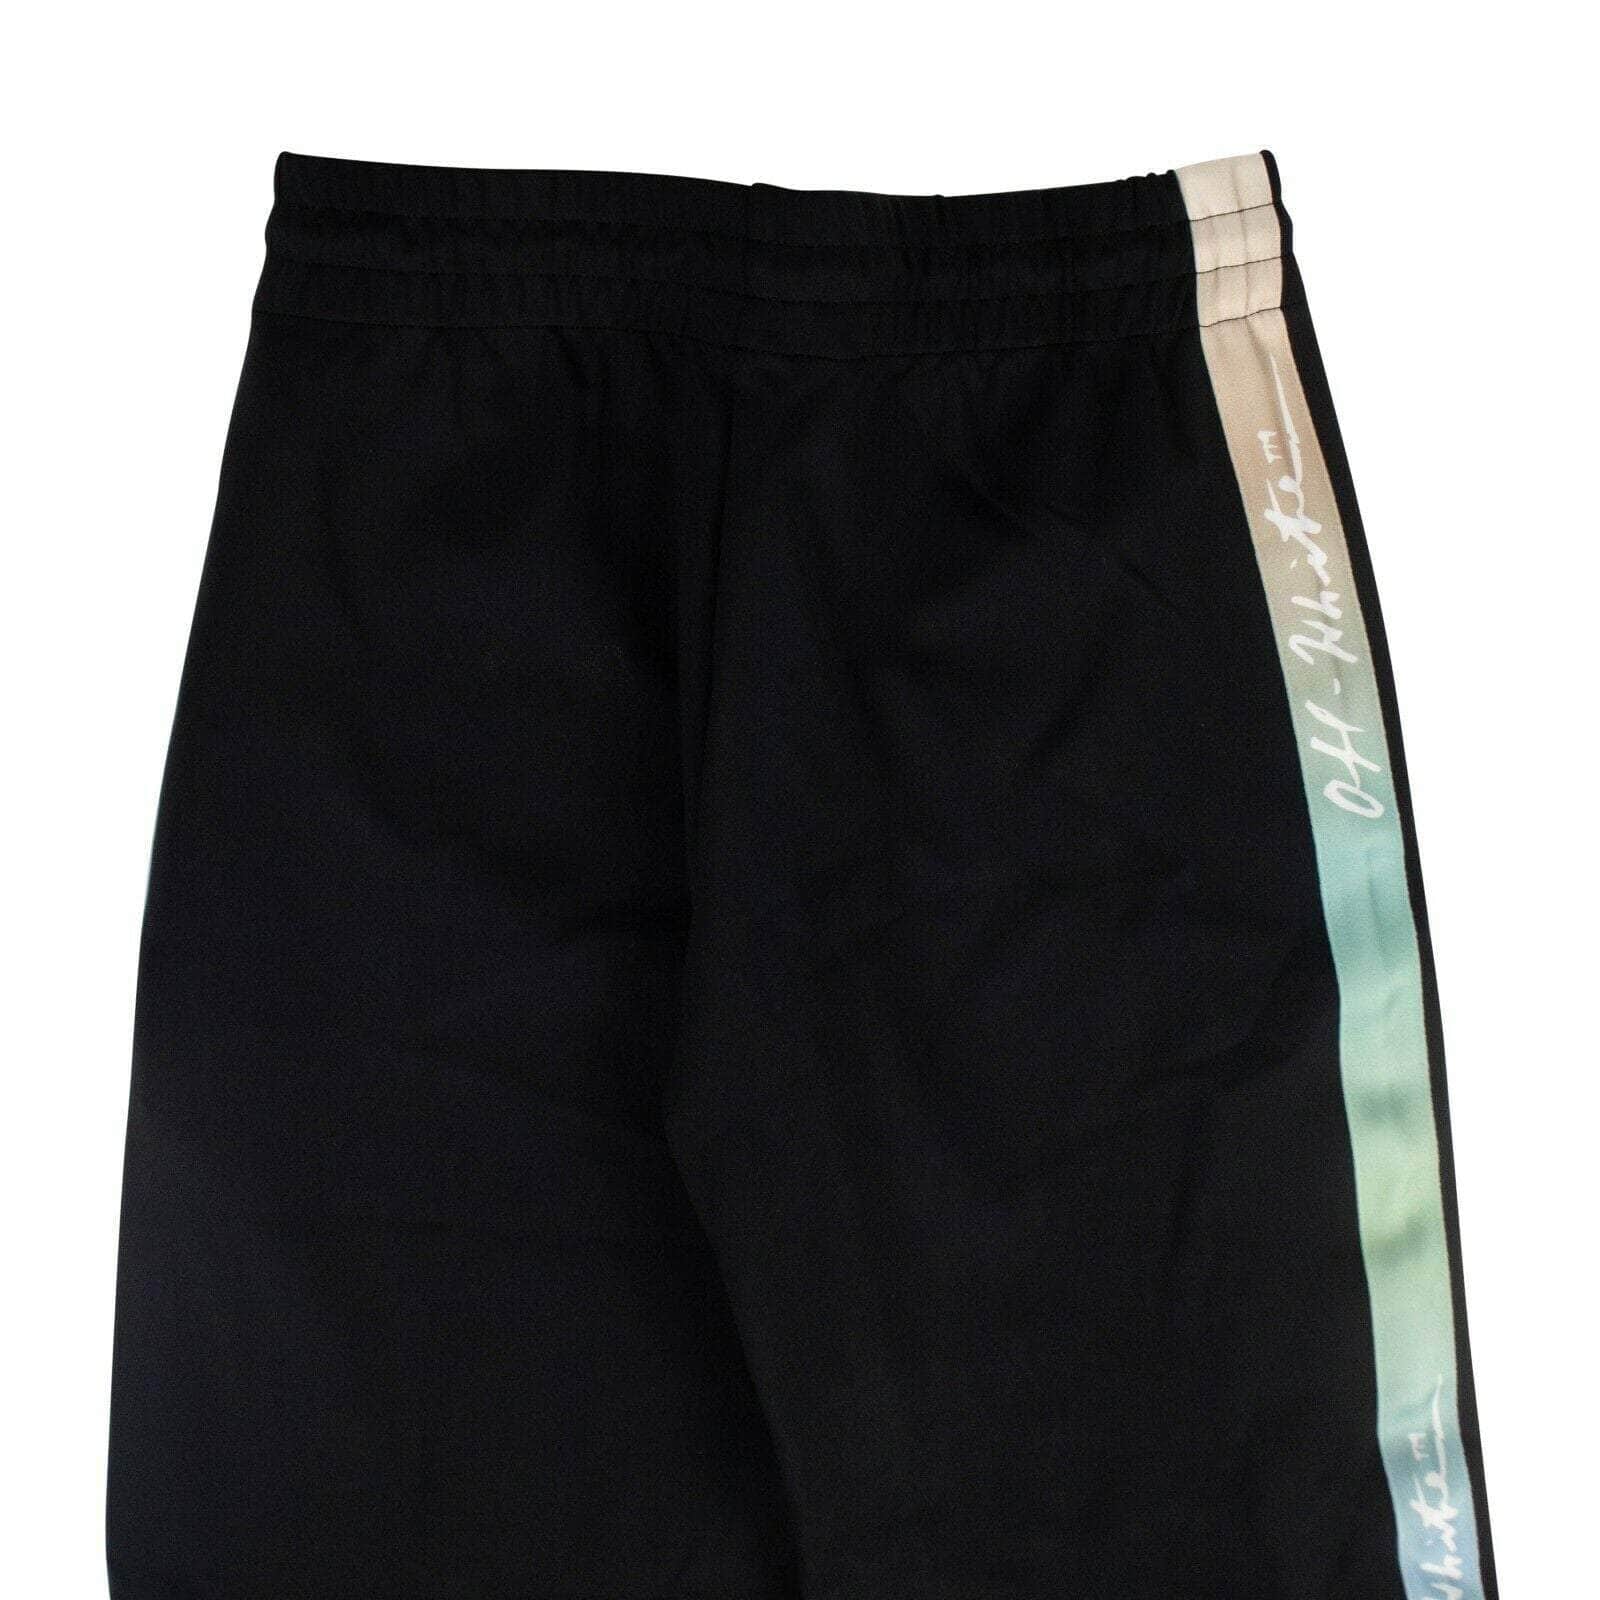 OFF-WHITE c/o VIRGIL ABLOH 250-500, chicmi, couponcollection, gender-womens, july4th, main-clothing, off-white, off-white-c-o-virgil-abloh, OFW2, owjuly4, OWW, pant, size-xs, SPO XS Side Paneled Track Pants - Black 89OW-1366/XS 89OW-1366/XS